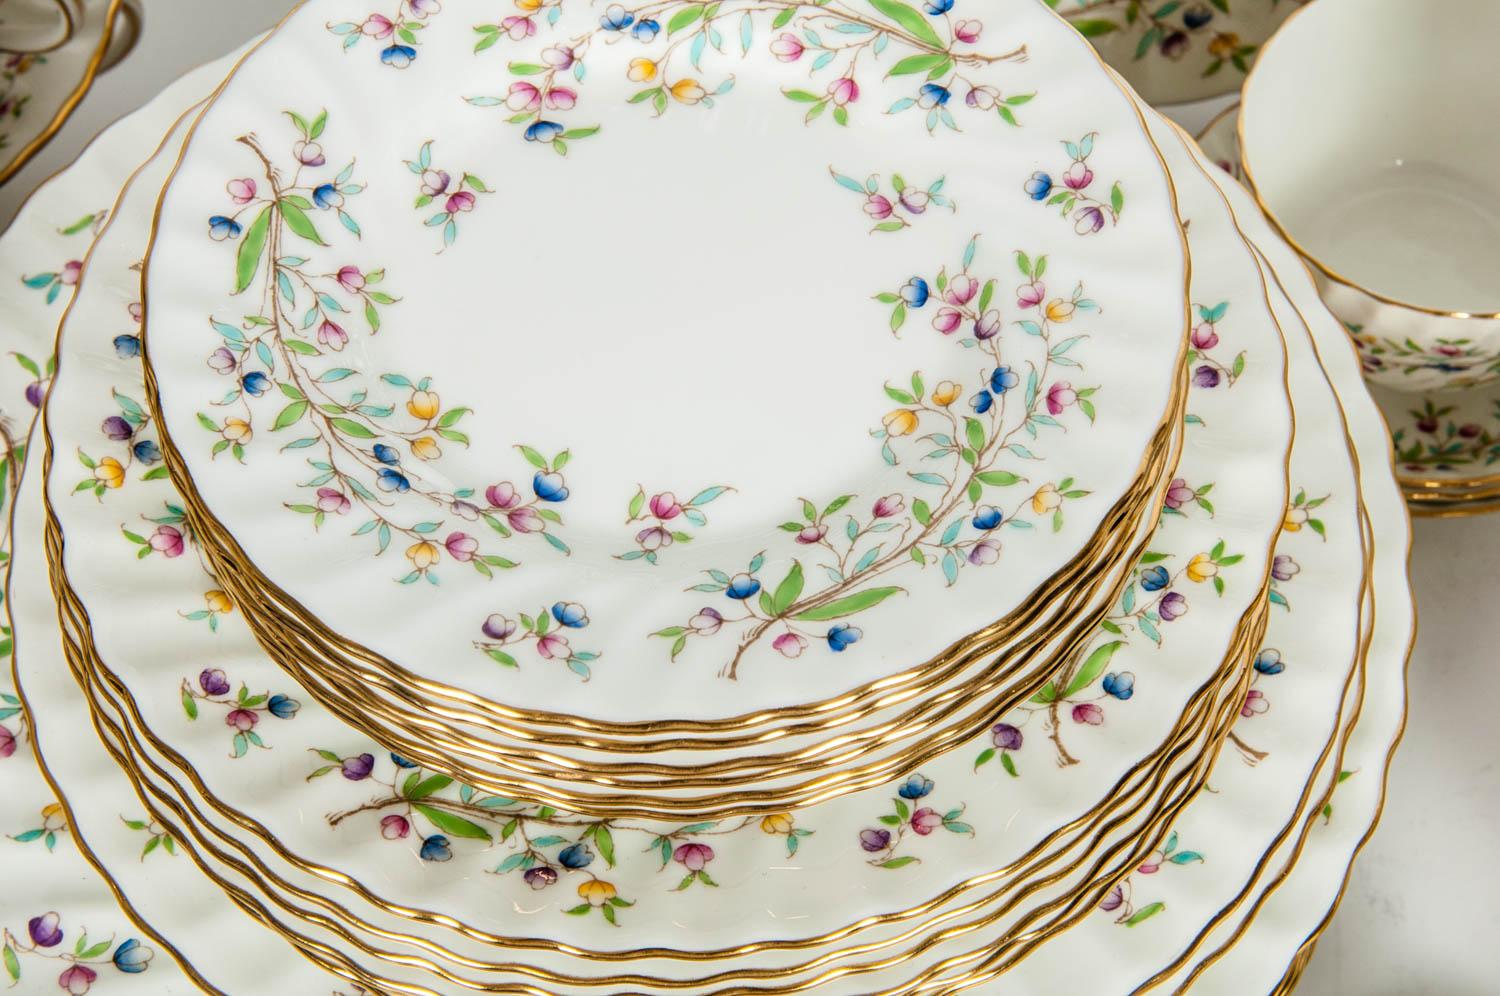 Minton English porcelain full service dinnerware for 12 people with serving pieces. Each piece is in excellent condition, maker's mark undersigned. The service include 12 Dinner, 12 Salad, 12 bread and butter, 12 dessert, 12 cups / saucers, 12 soup